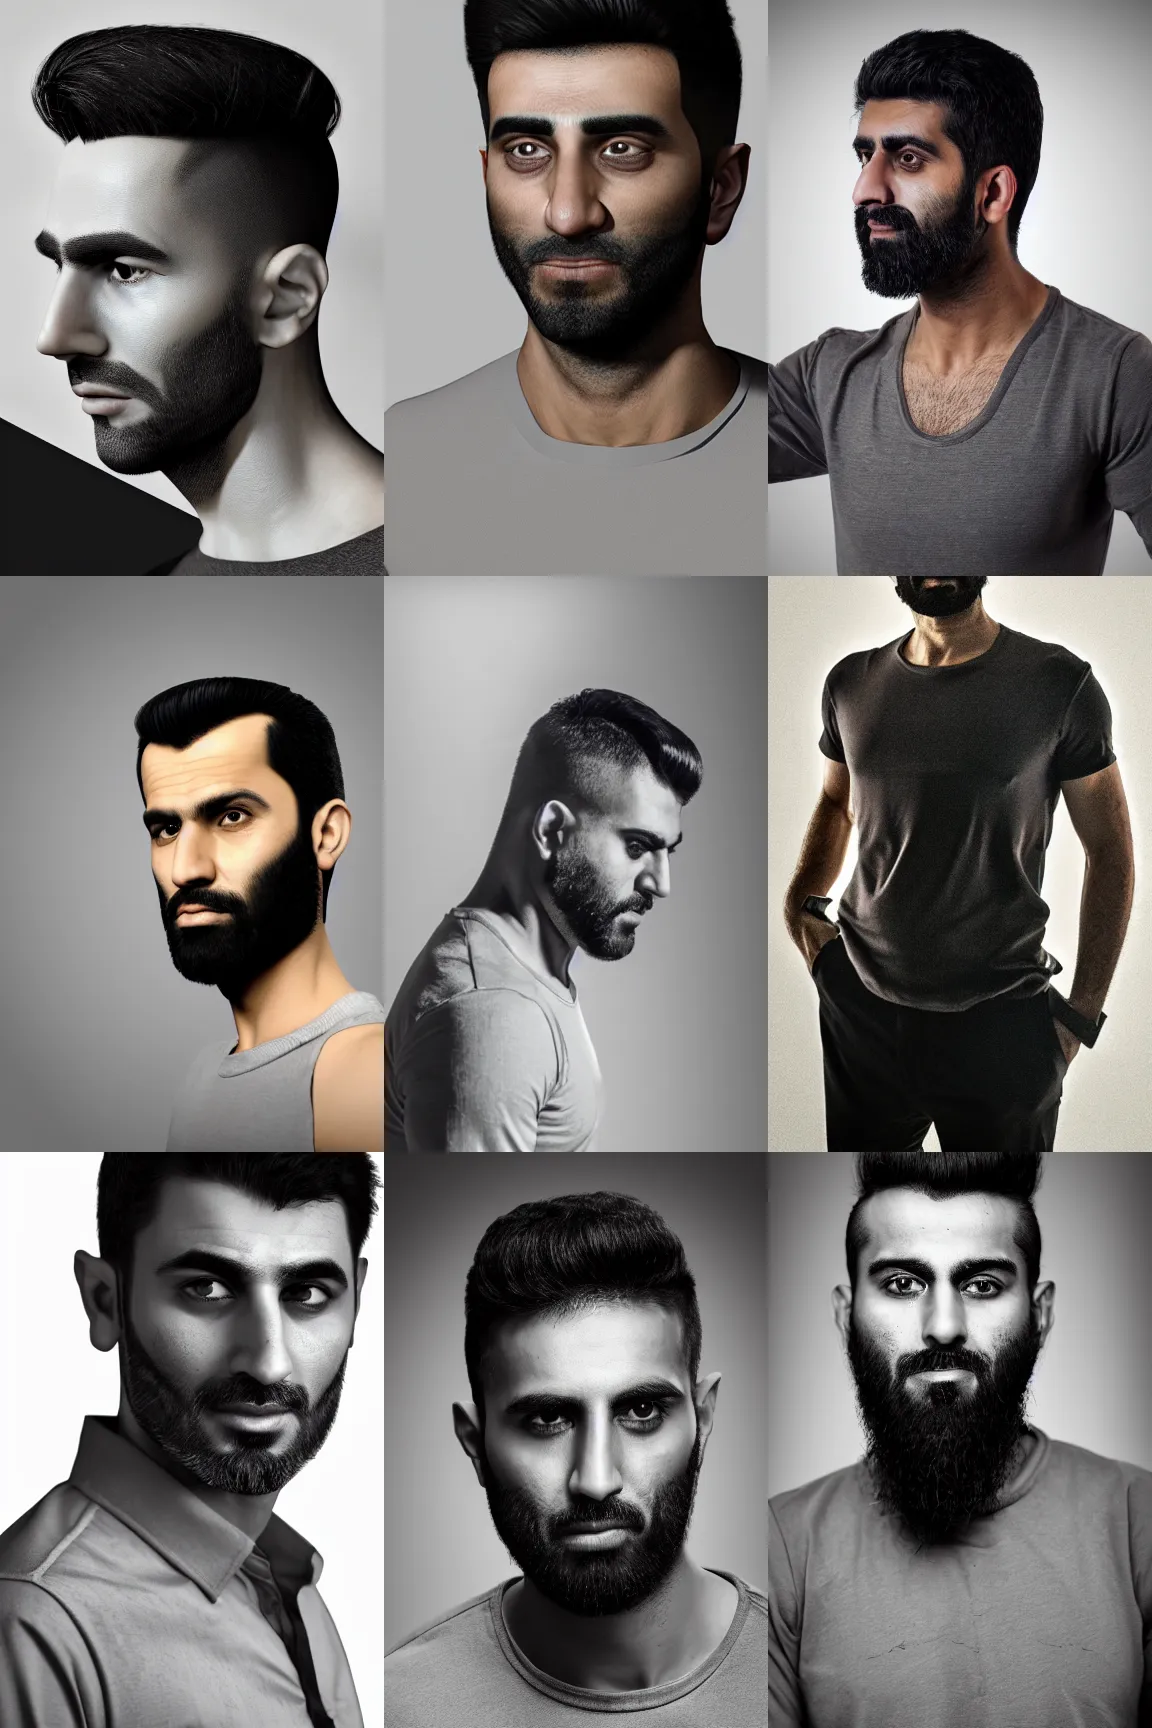 demente | Photography poses for men, Hands on face, Male portrait poses